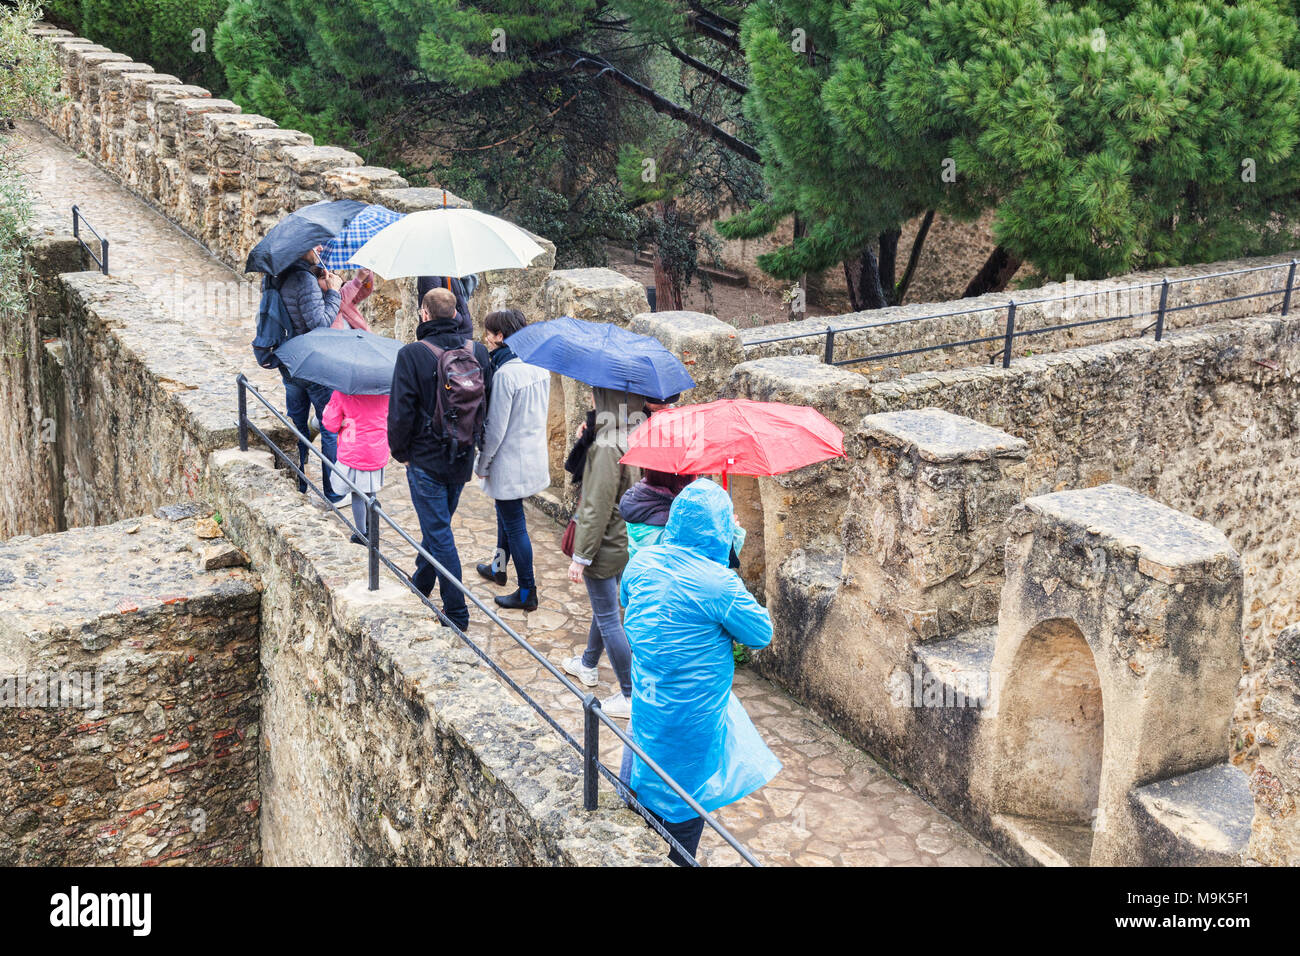 1 March 2018: Lisbon, Portugal - Tourists with umbrellas on the ramparts of Lisbon Caste, sightseeing in the rain. Stock Photo